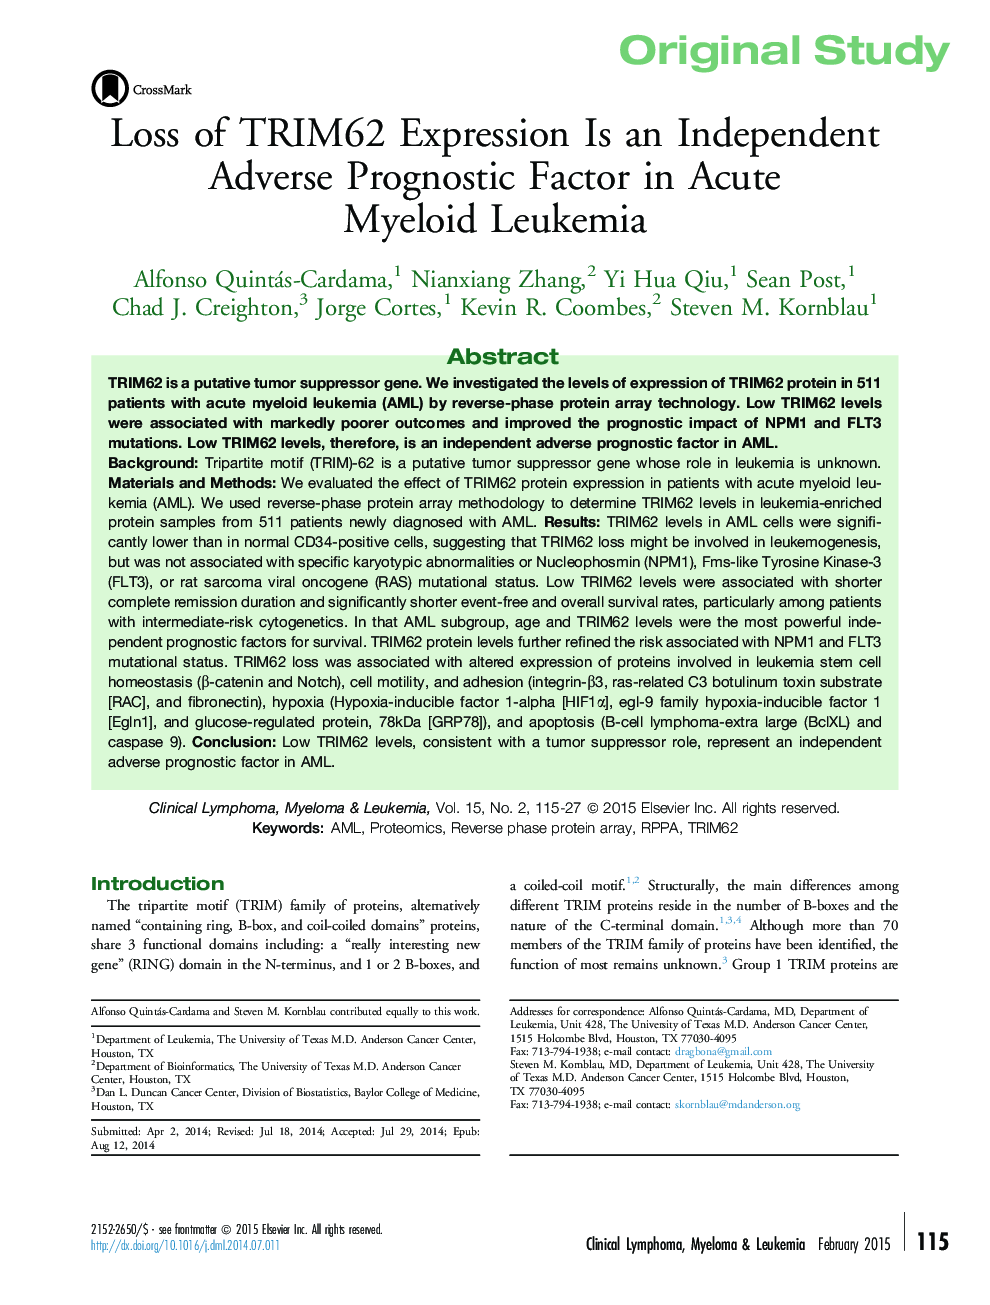 Loss of TRIM62 Expression Is an Independent Adverse Prognostic Factor in Acute MyeloidÂ Leukemia